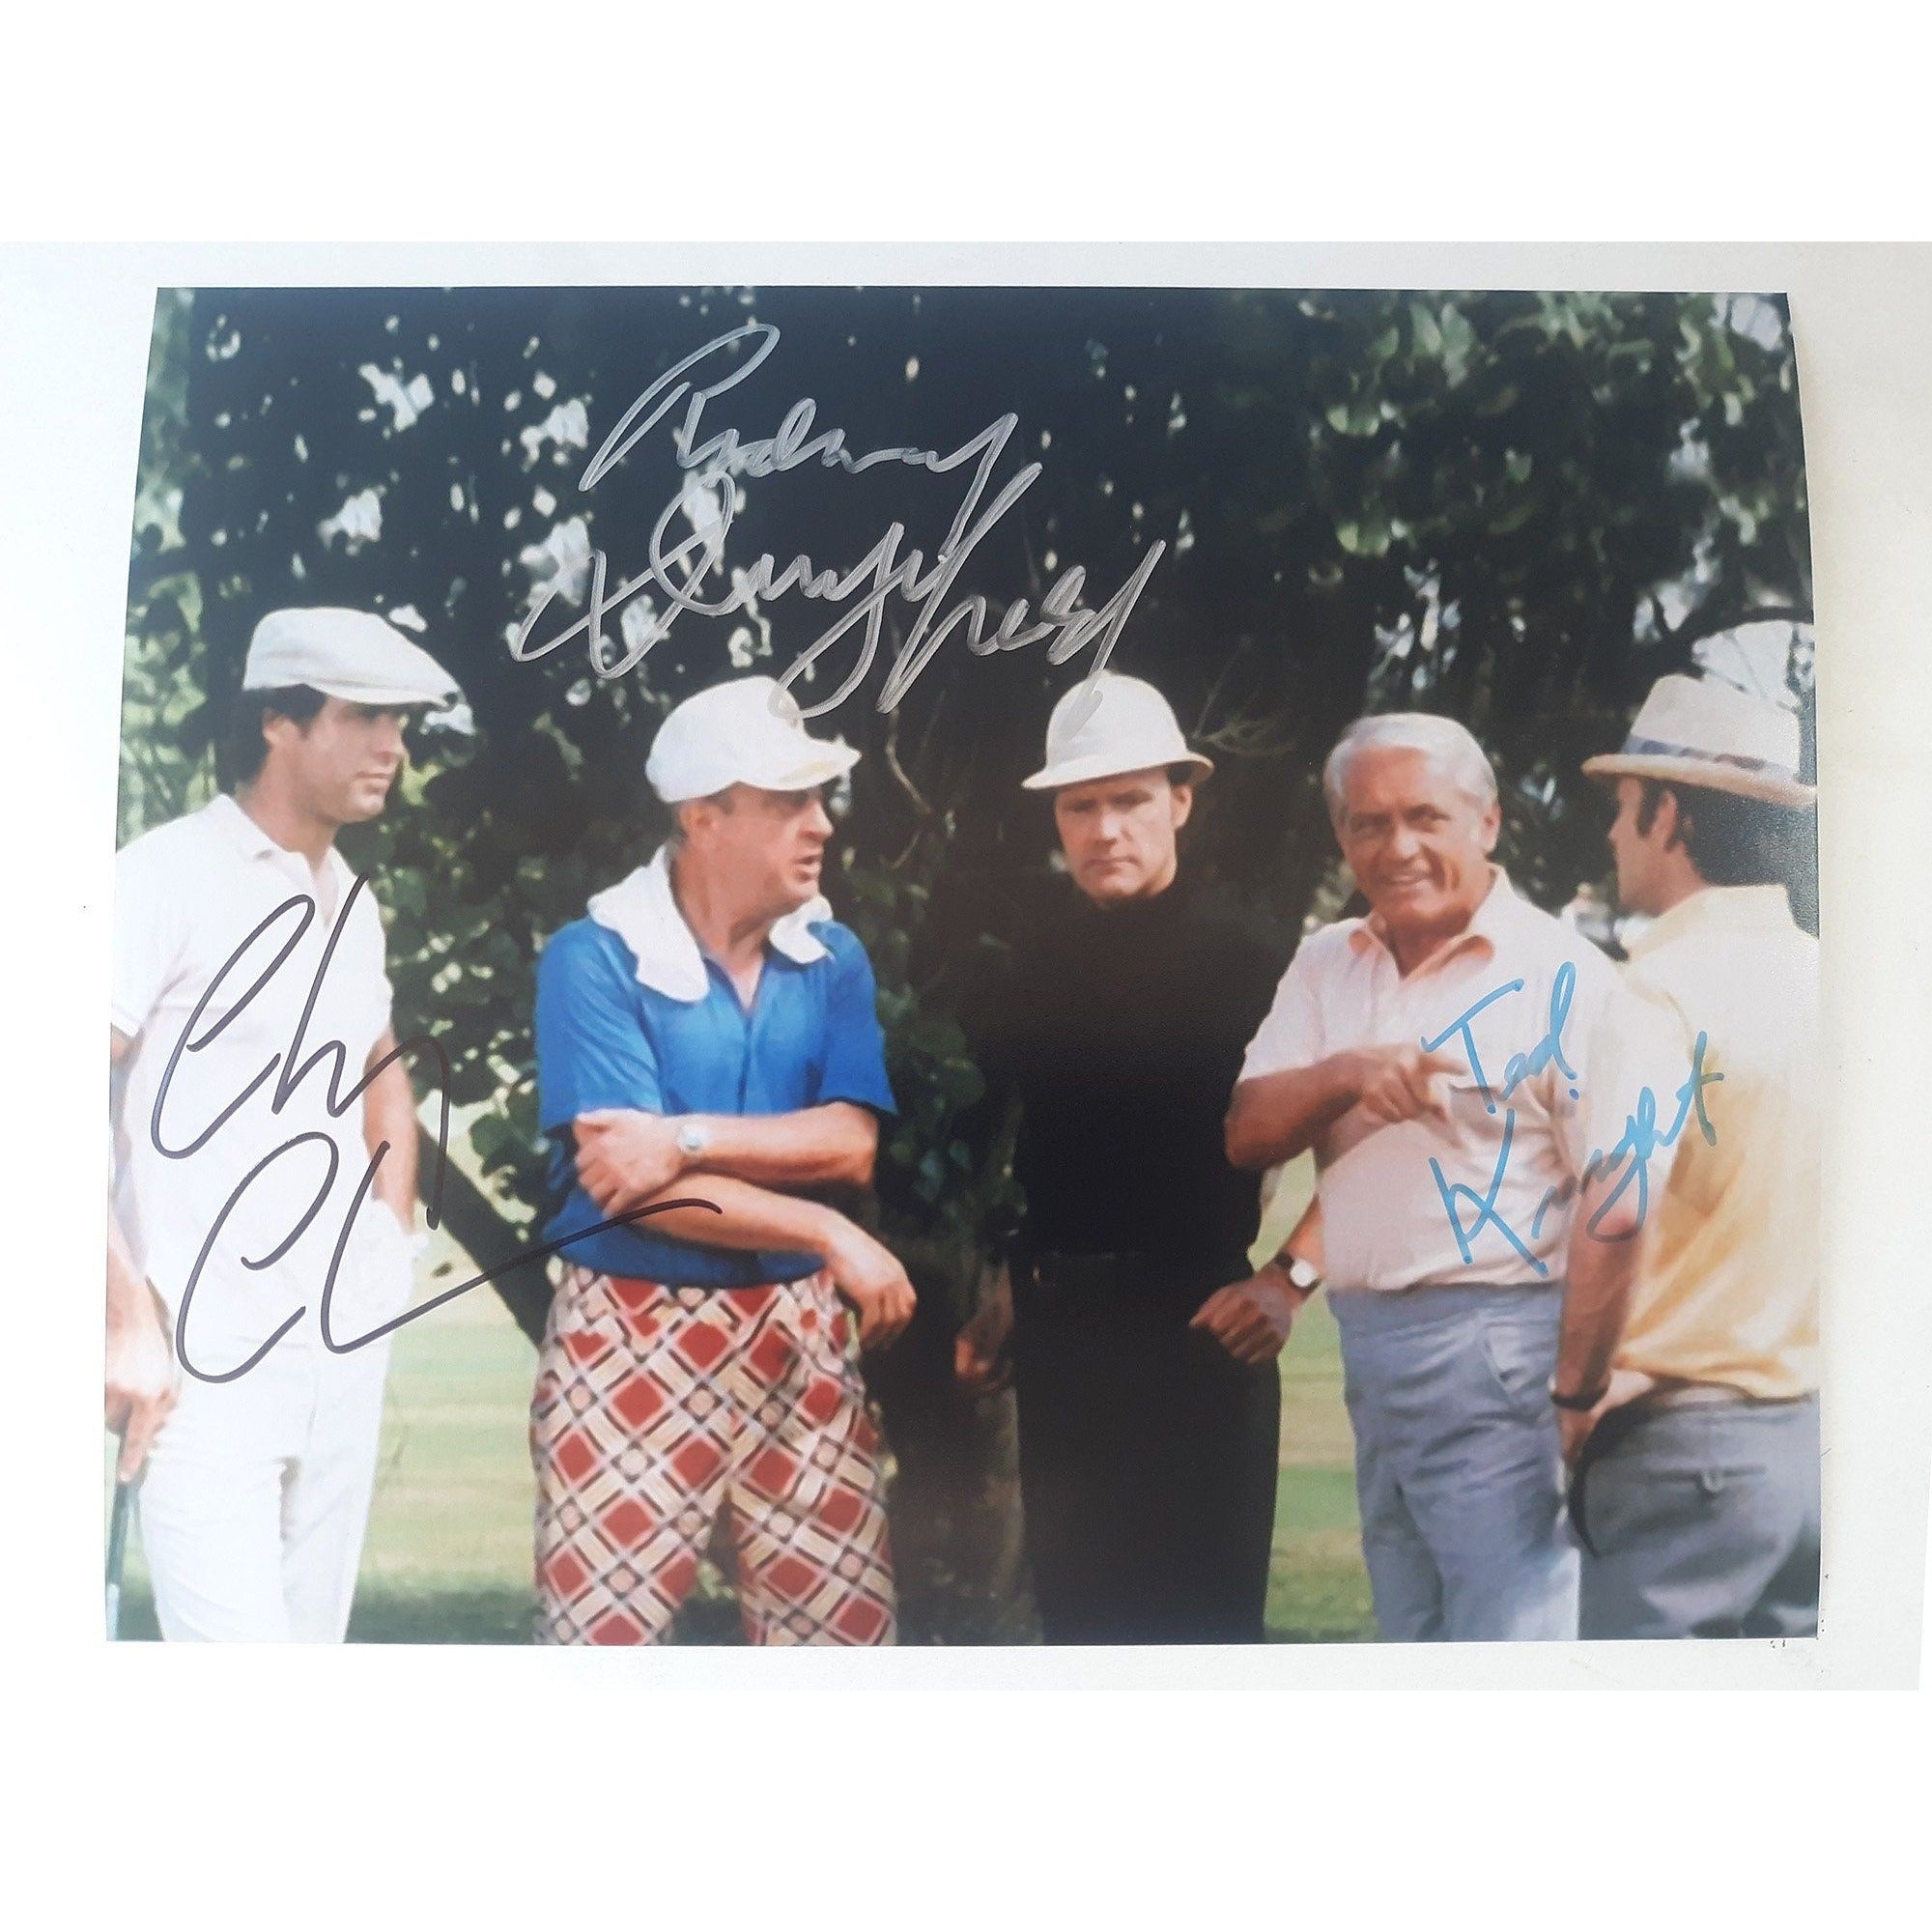 Chevy Chase, Rodney Dangerfield, Tom Knight 8x10 photo Caddyshack signed with proof